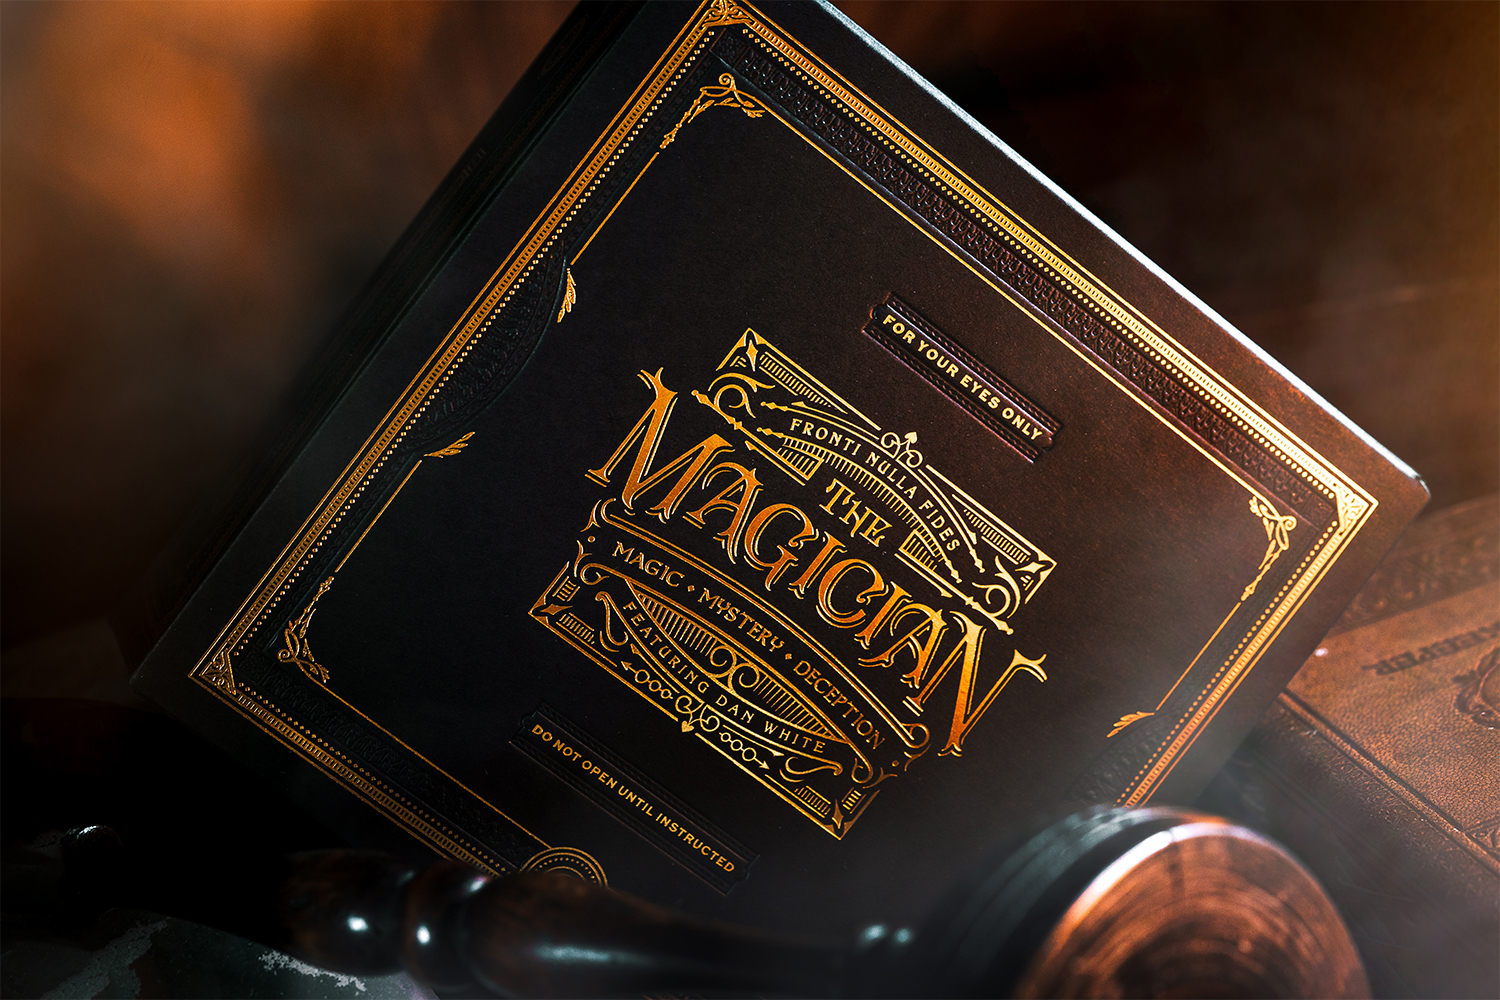 The black and gold box sent to people who buy ticket's for "The Magician," Dan White's Zoom version of the magic show once at the NoMad Hotel in New York City